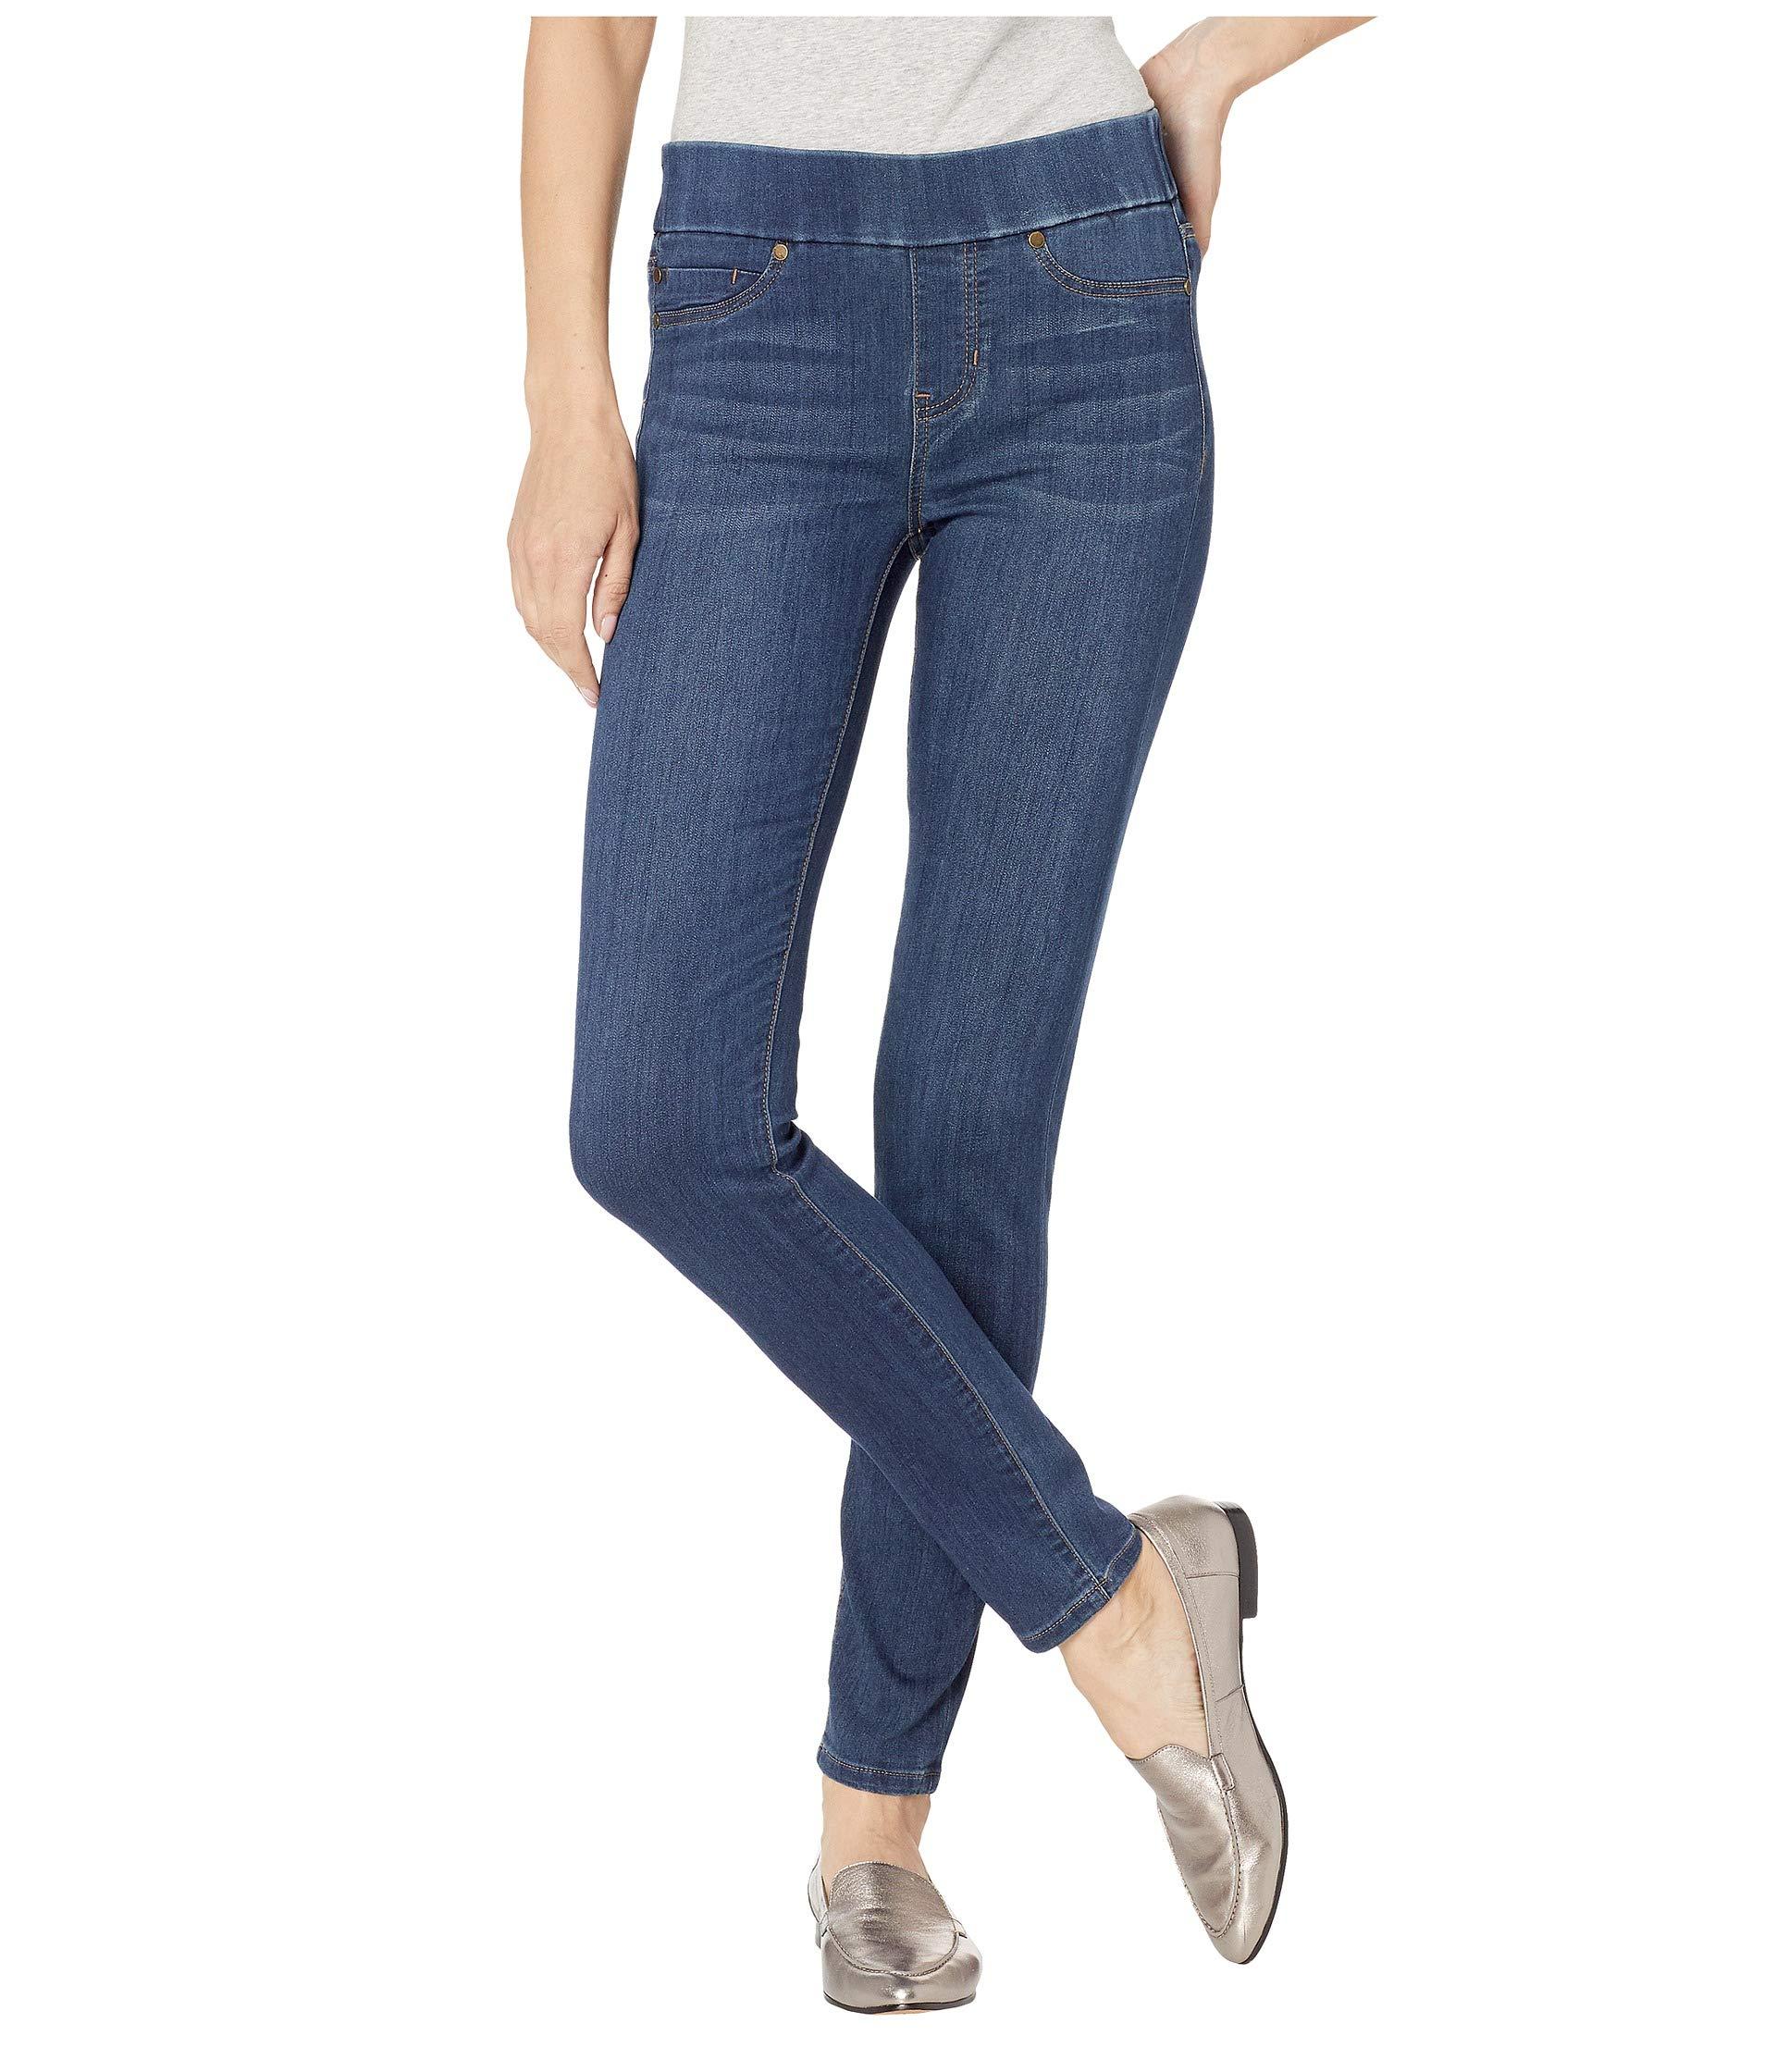 Pull On Blue Jean Leggings For Women  International Society of Precision  Agriculture